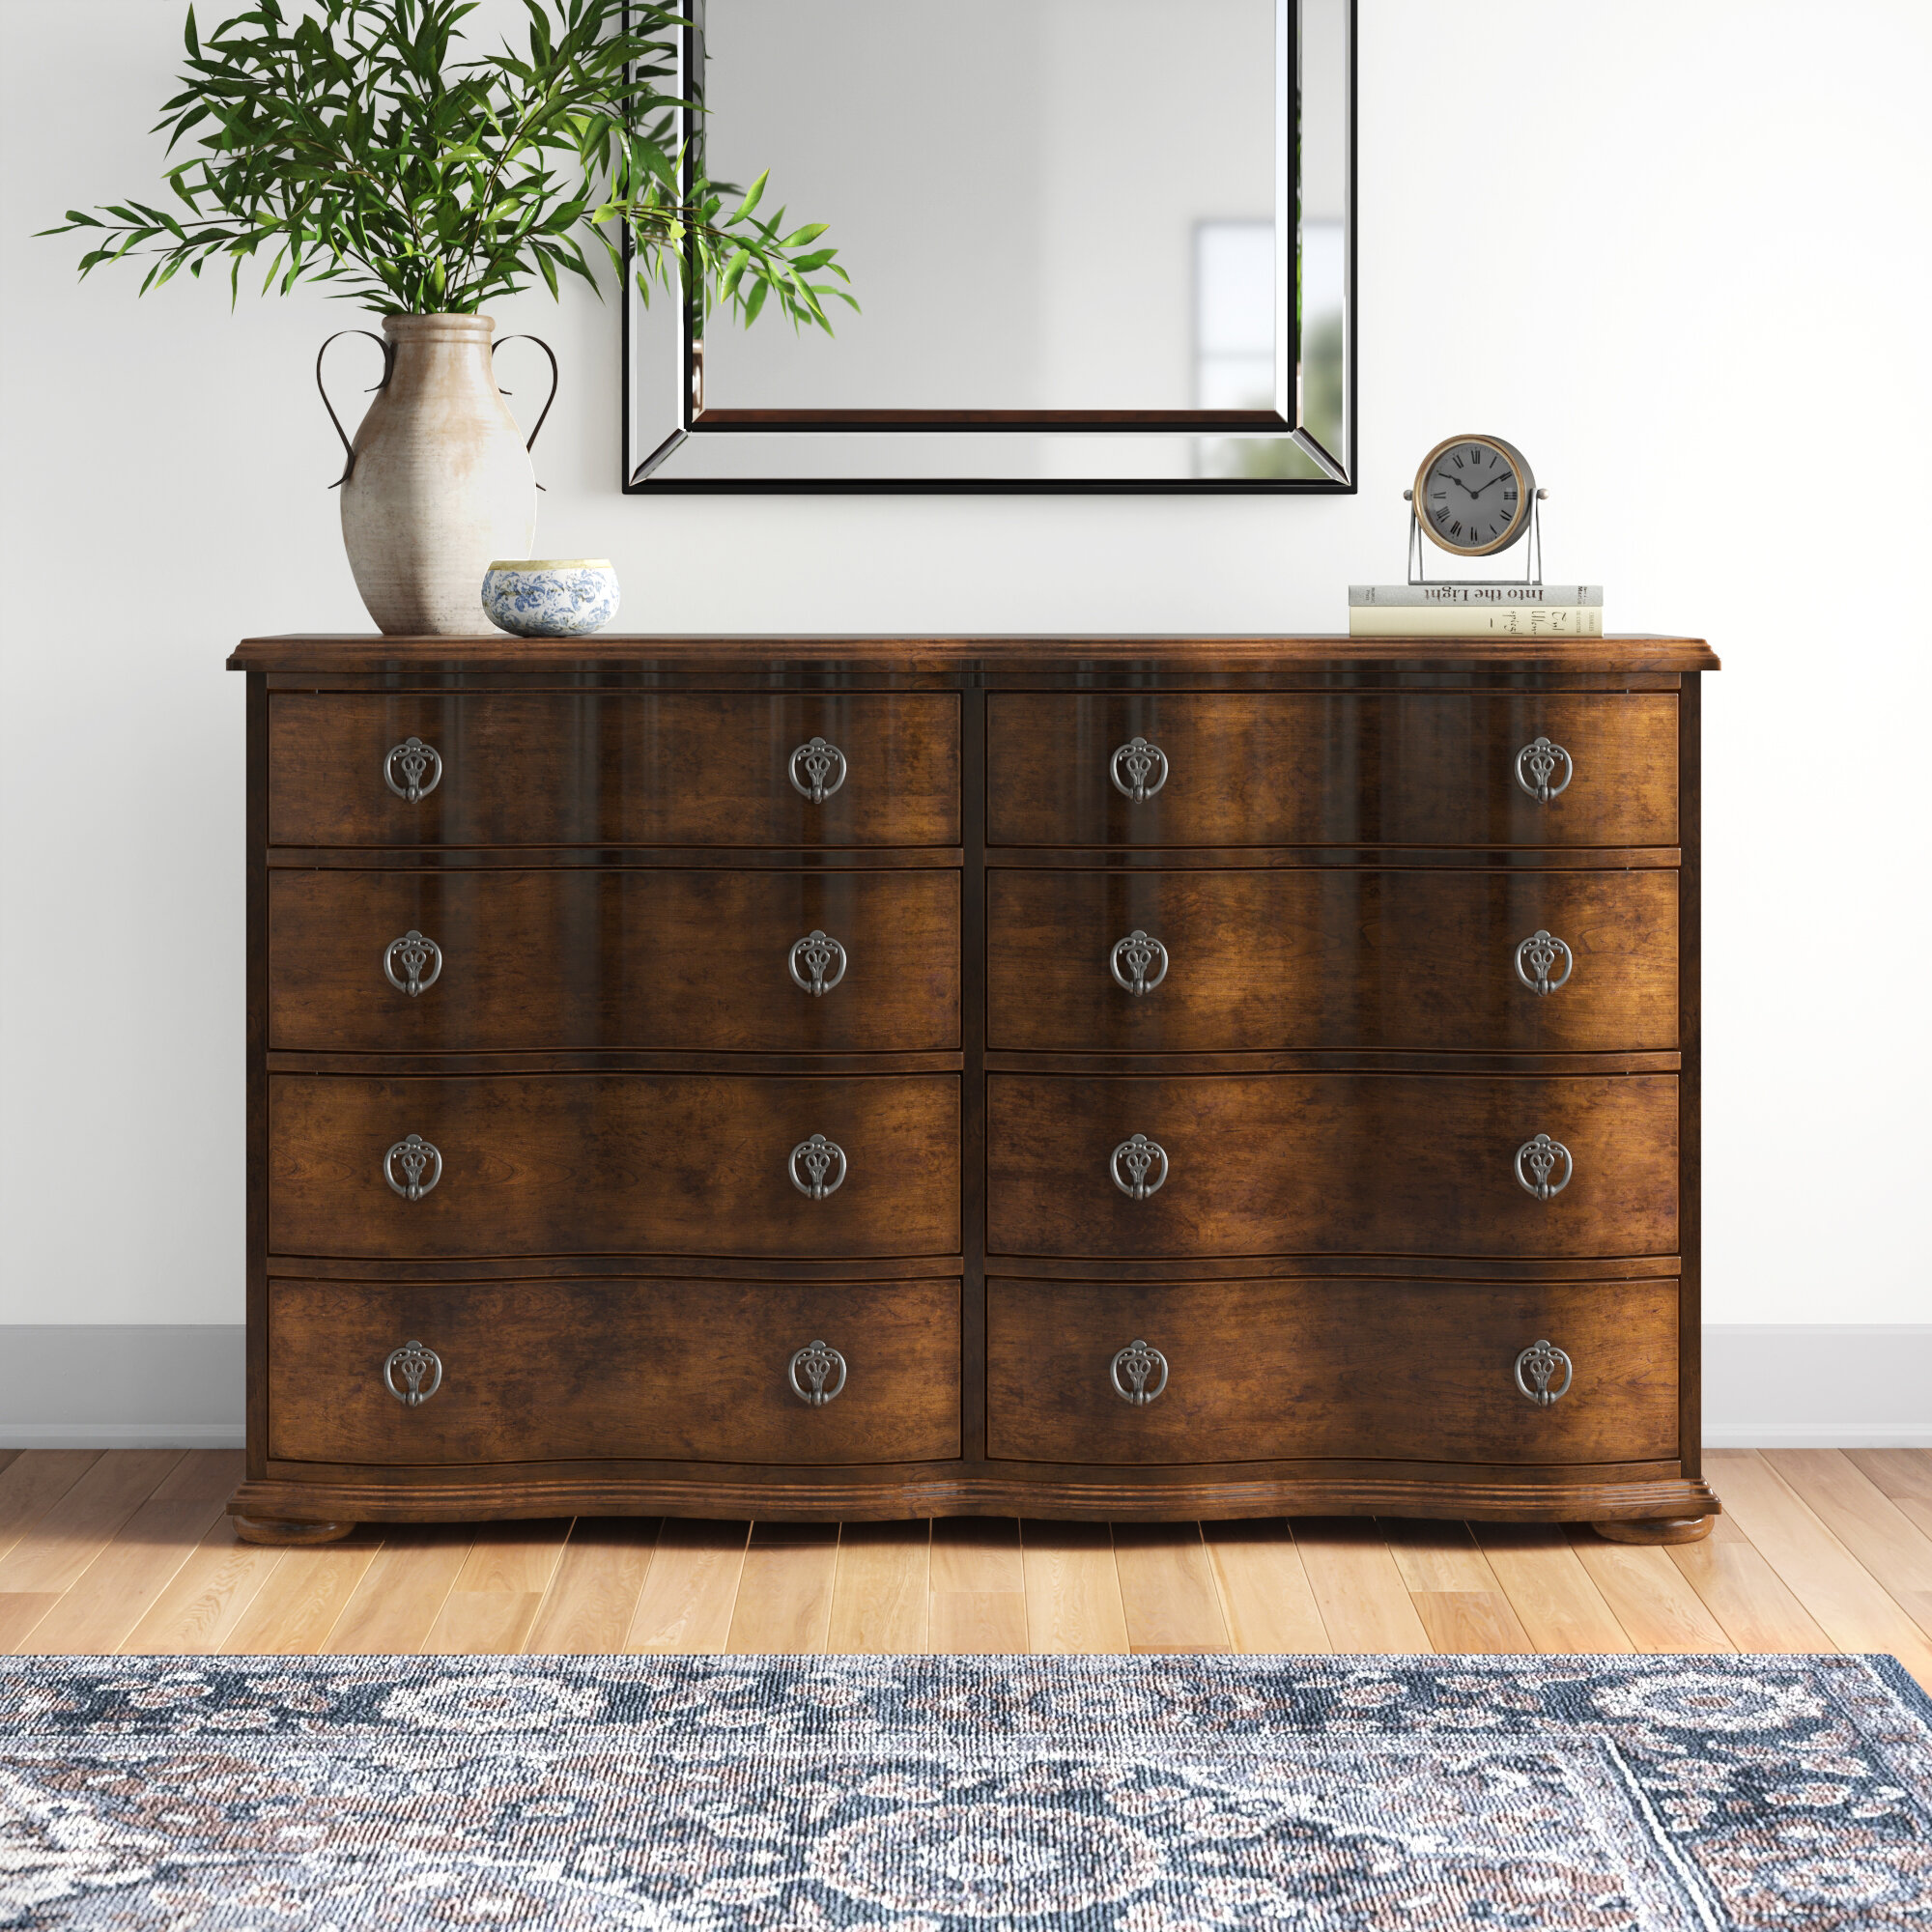 Cherry Espresso Wood Dressers Chests You Ll Love In 2021 Wayfair